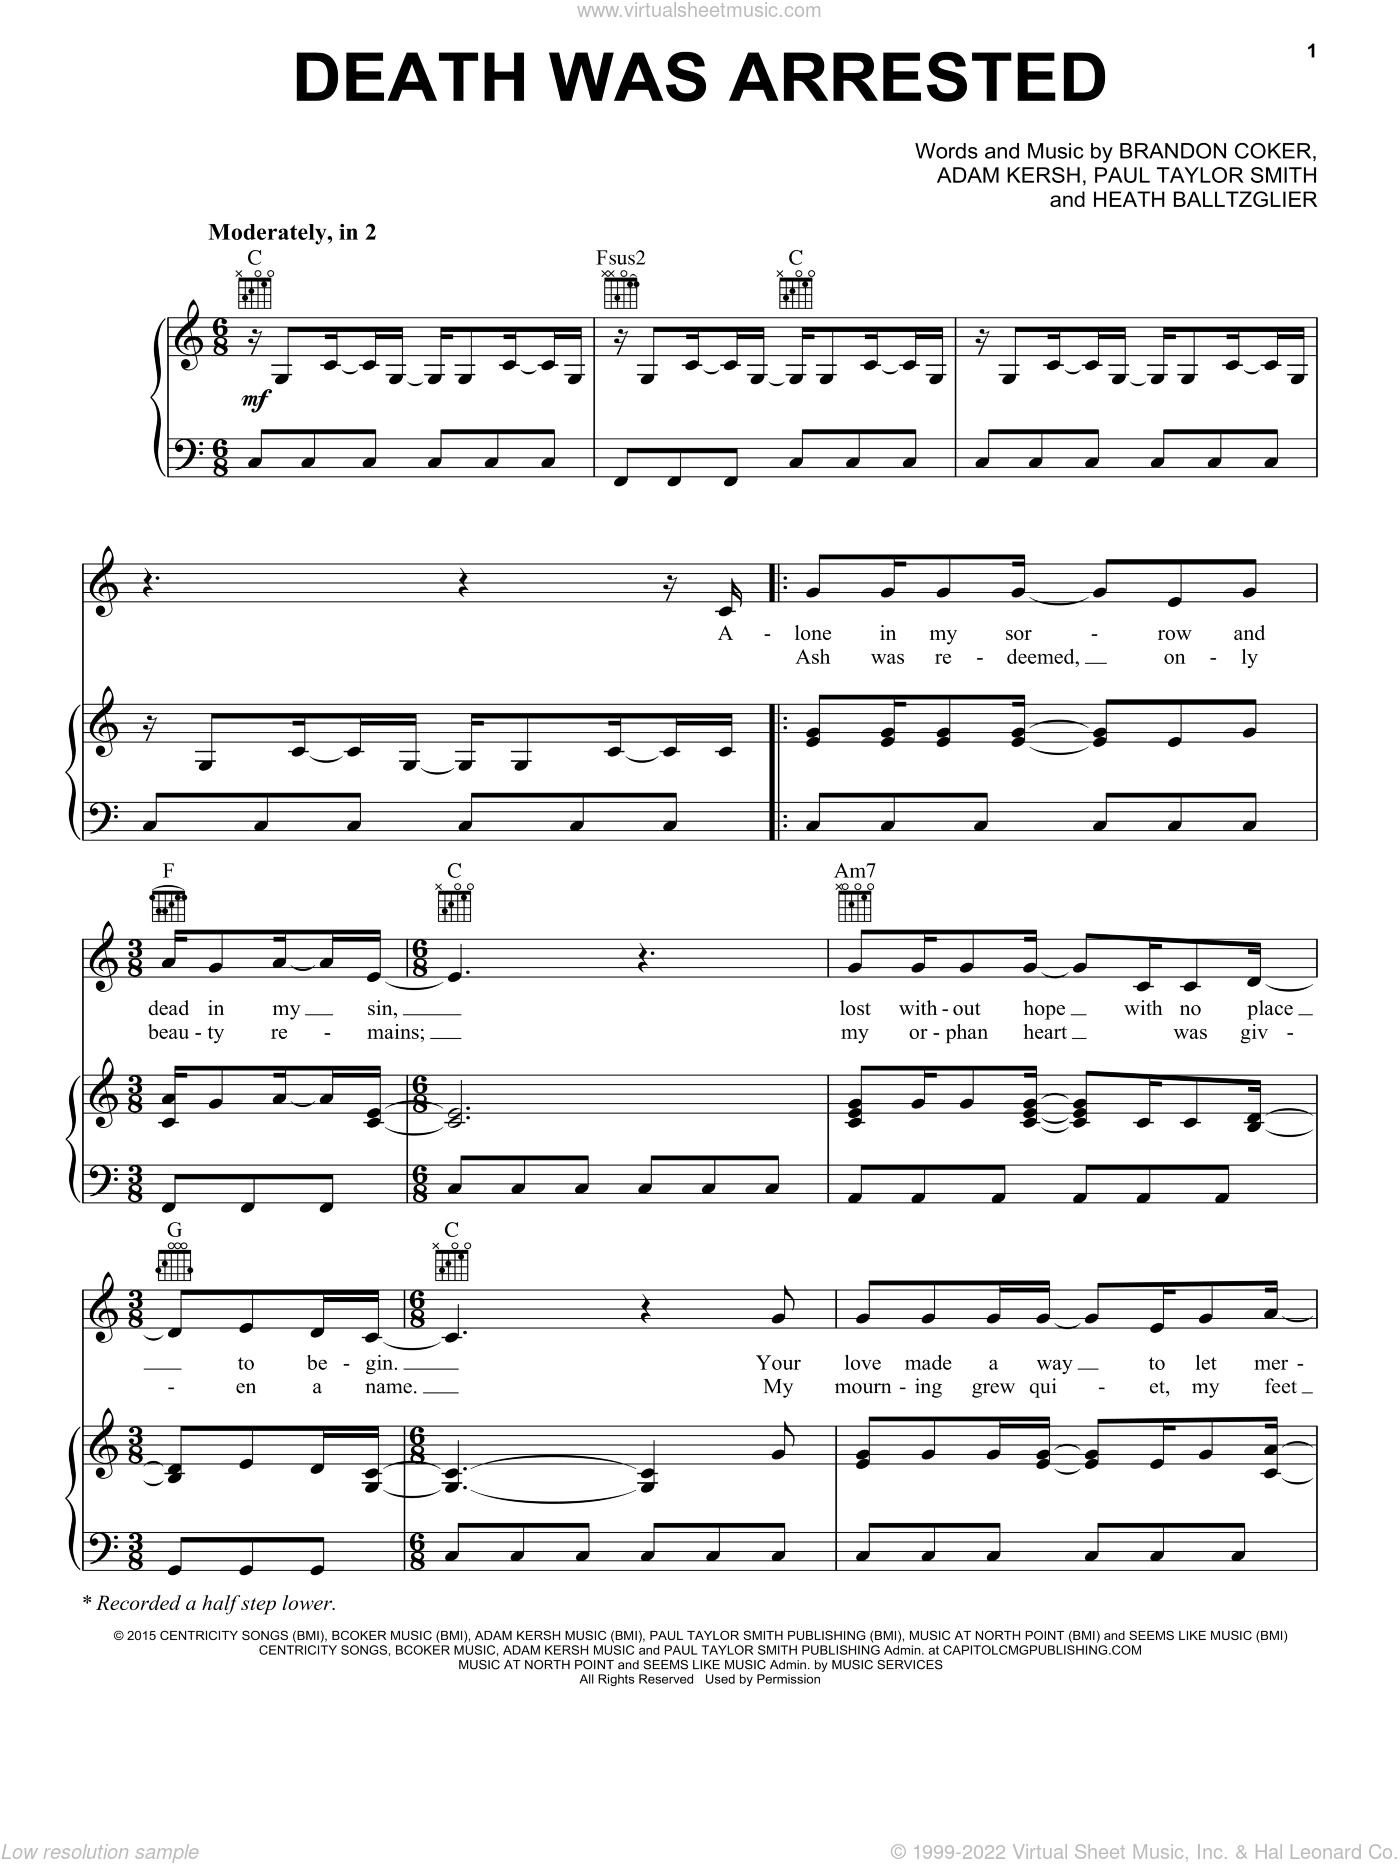 InsideOut - Death Was Arrested sheet music for voice, piano or guitar